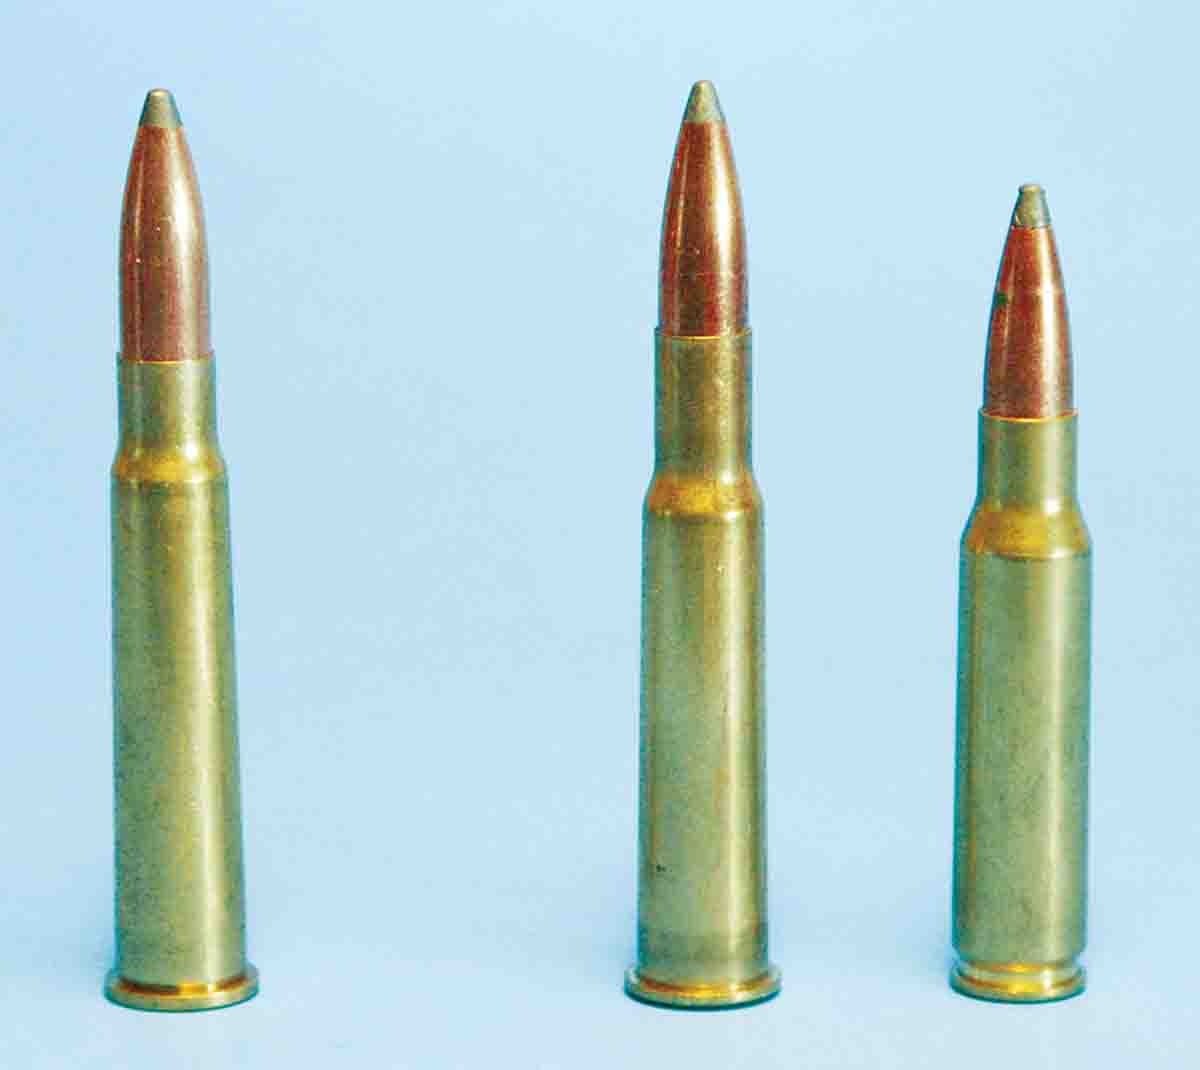 The U.S. Army semi-copied the .303 British (left) when developing the .30-40 Krag (center), but gave the .30-40 a much longer neck. However, in 1920, the very short-necked .300 Savage appeared (right), which almost matches the powder capacity of the .303 and .30-40.